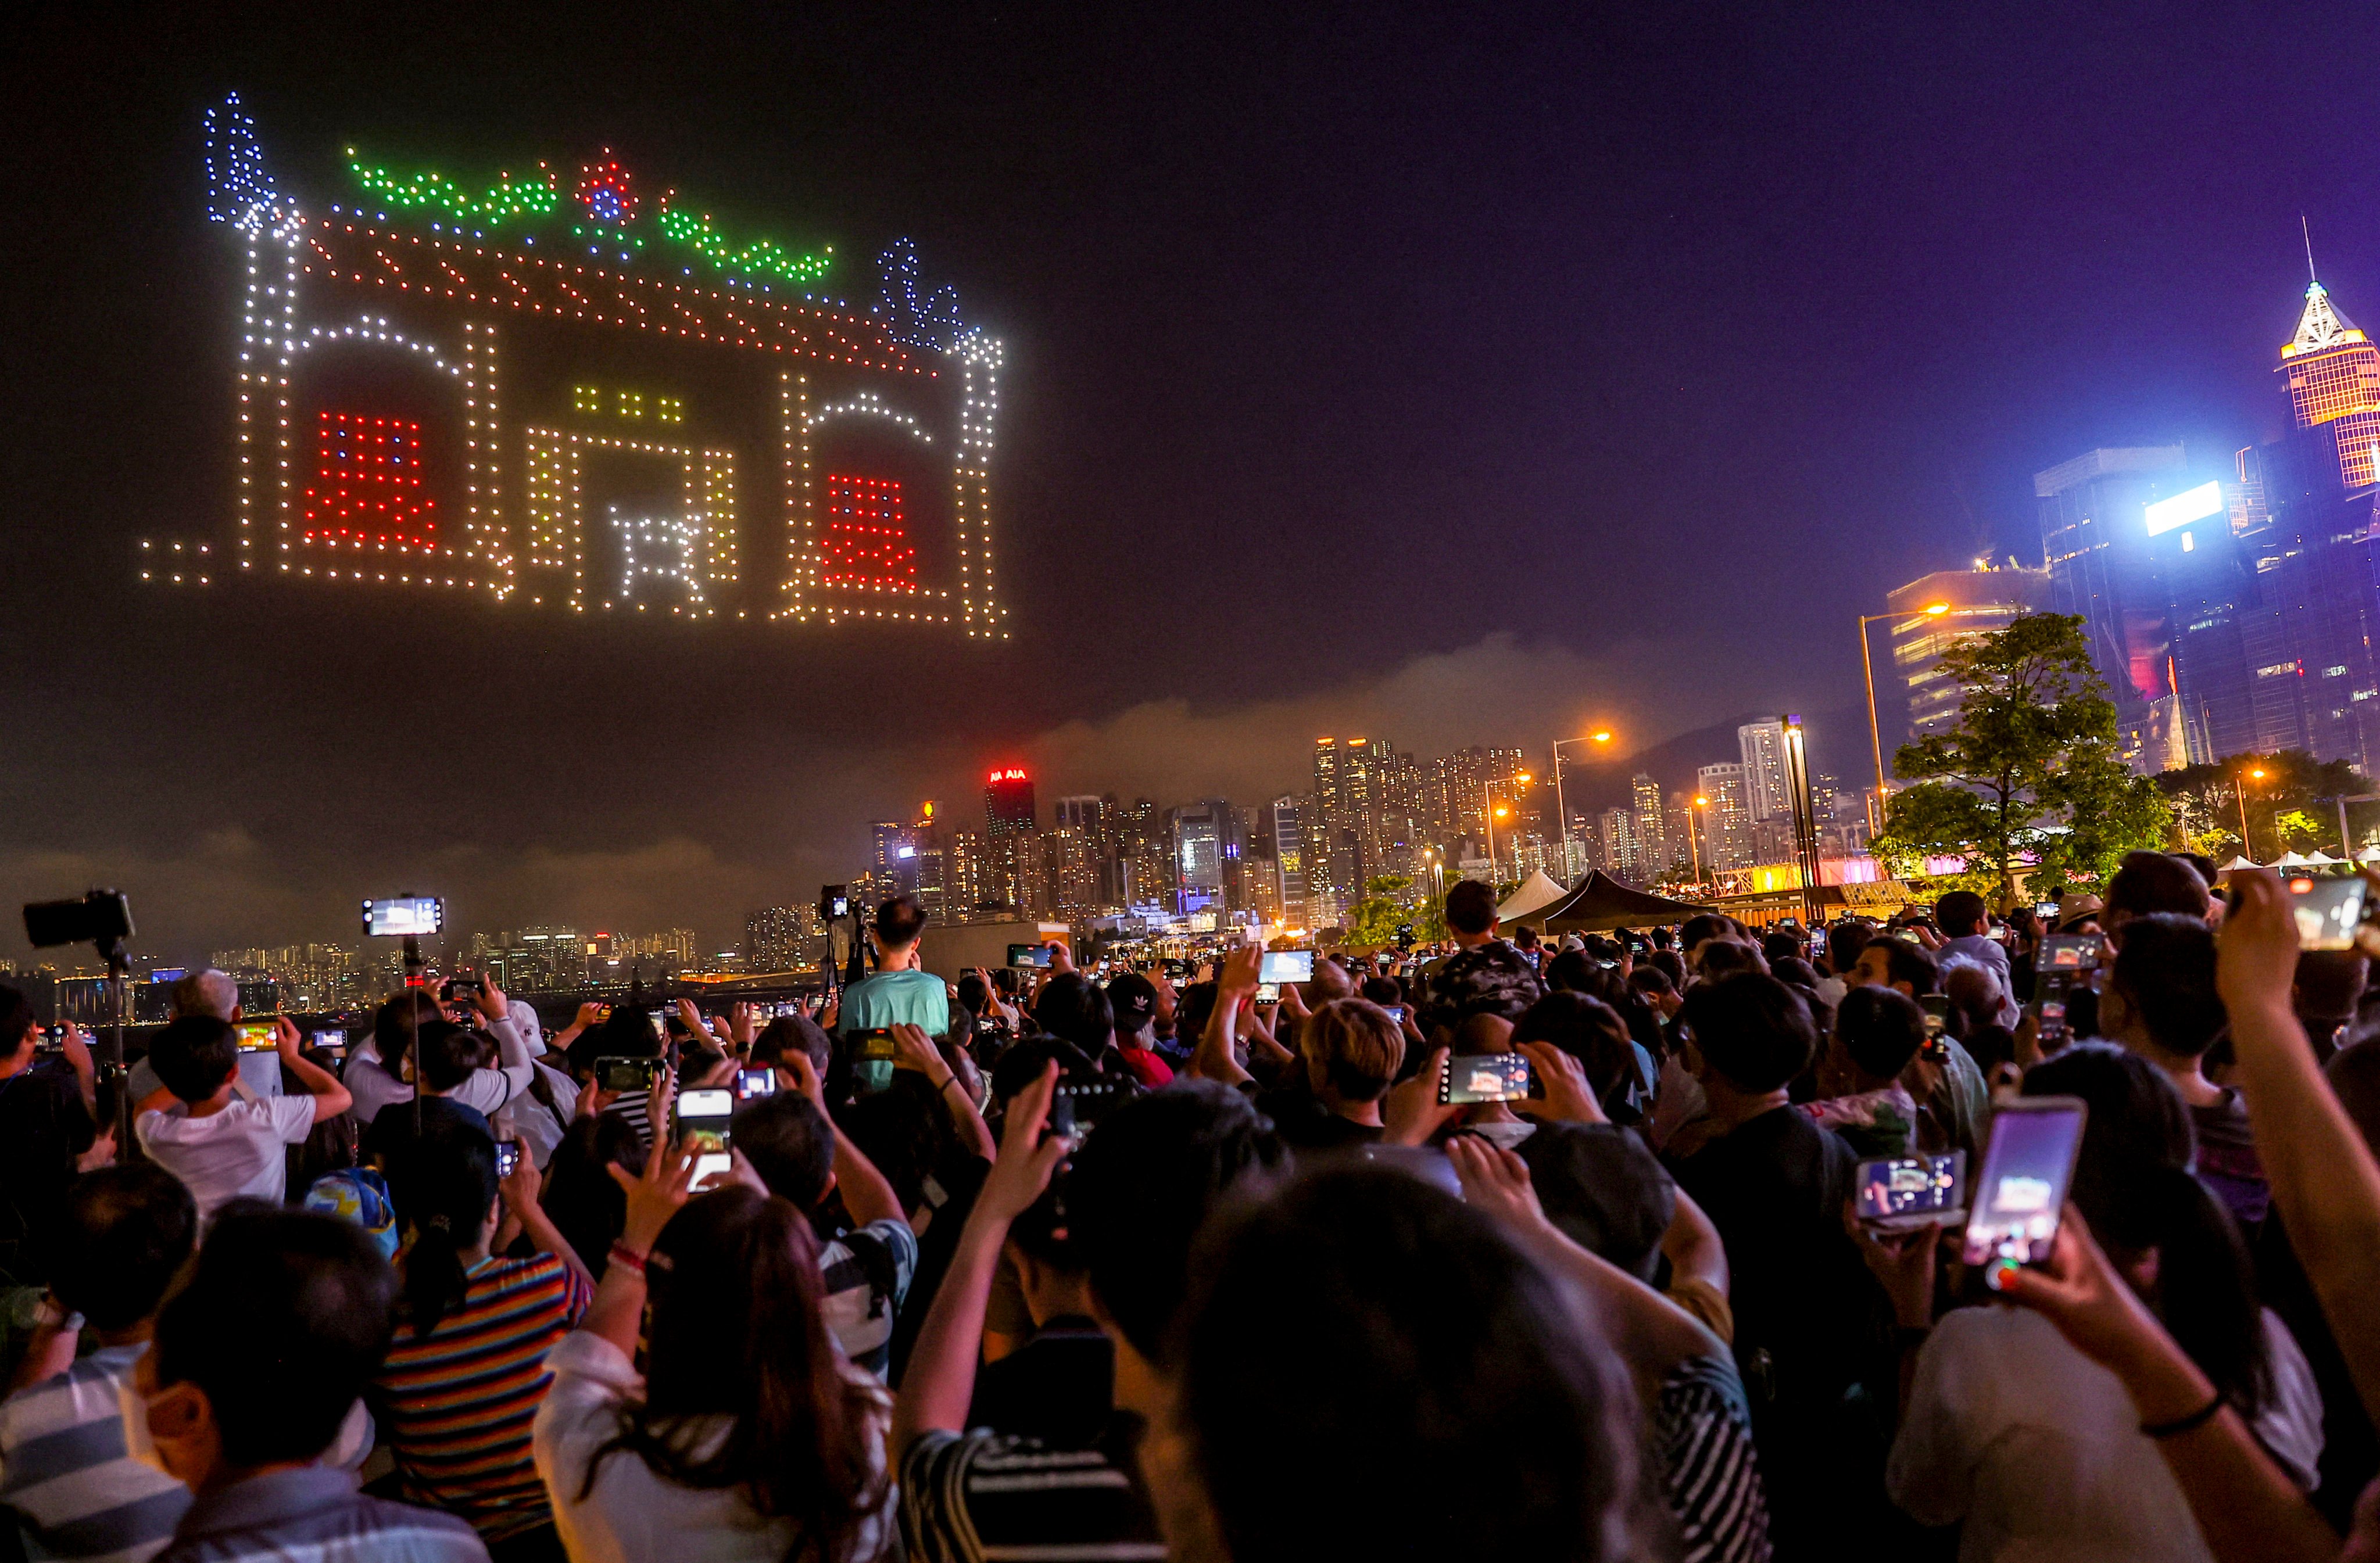 The Hong Kong Tourism Board held a drone show as part of the celebrations for Buddha’s birthday. Photo: Edmond So